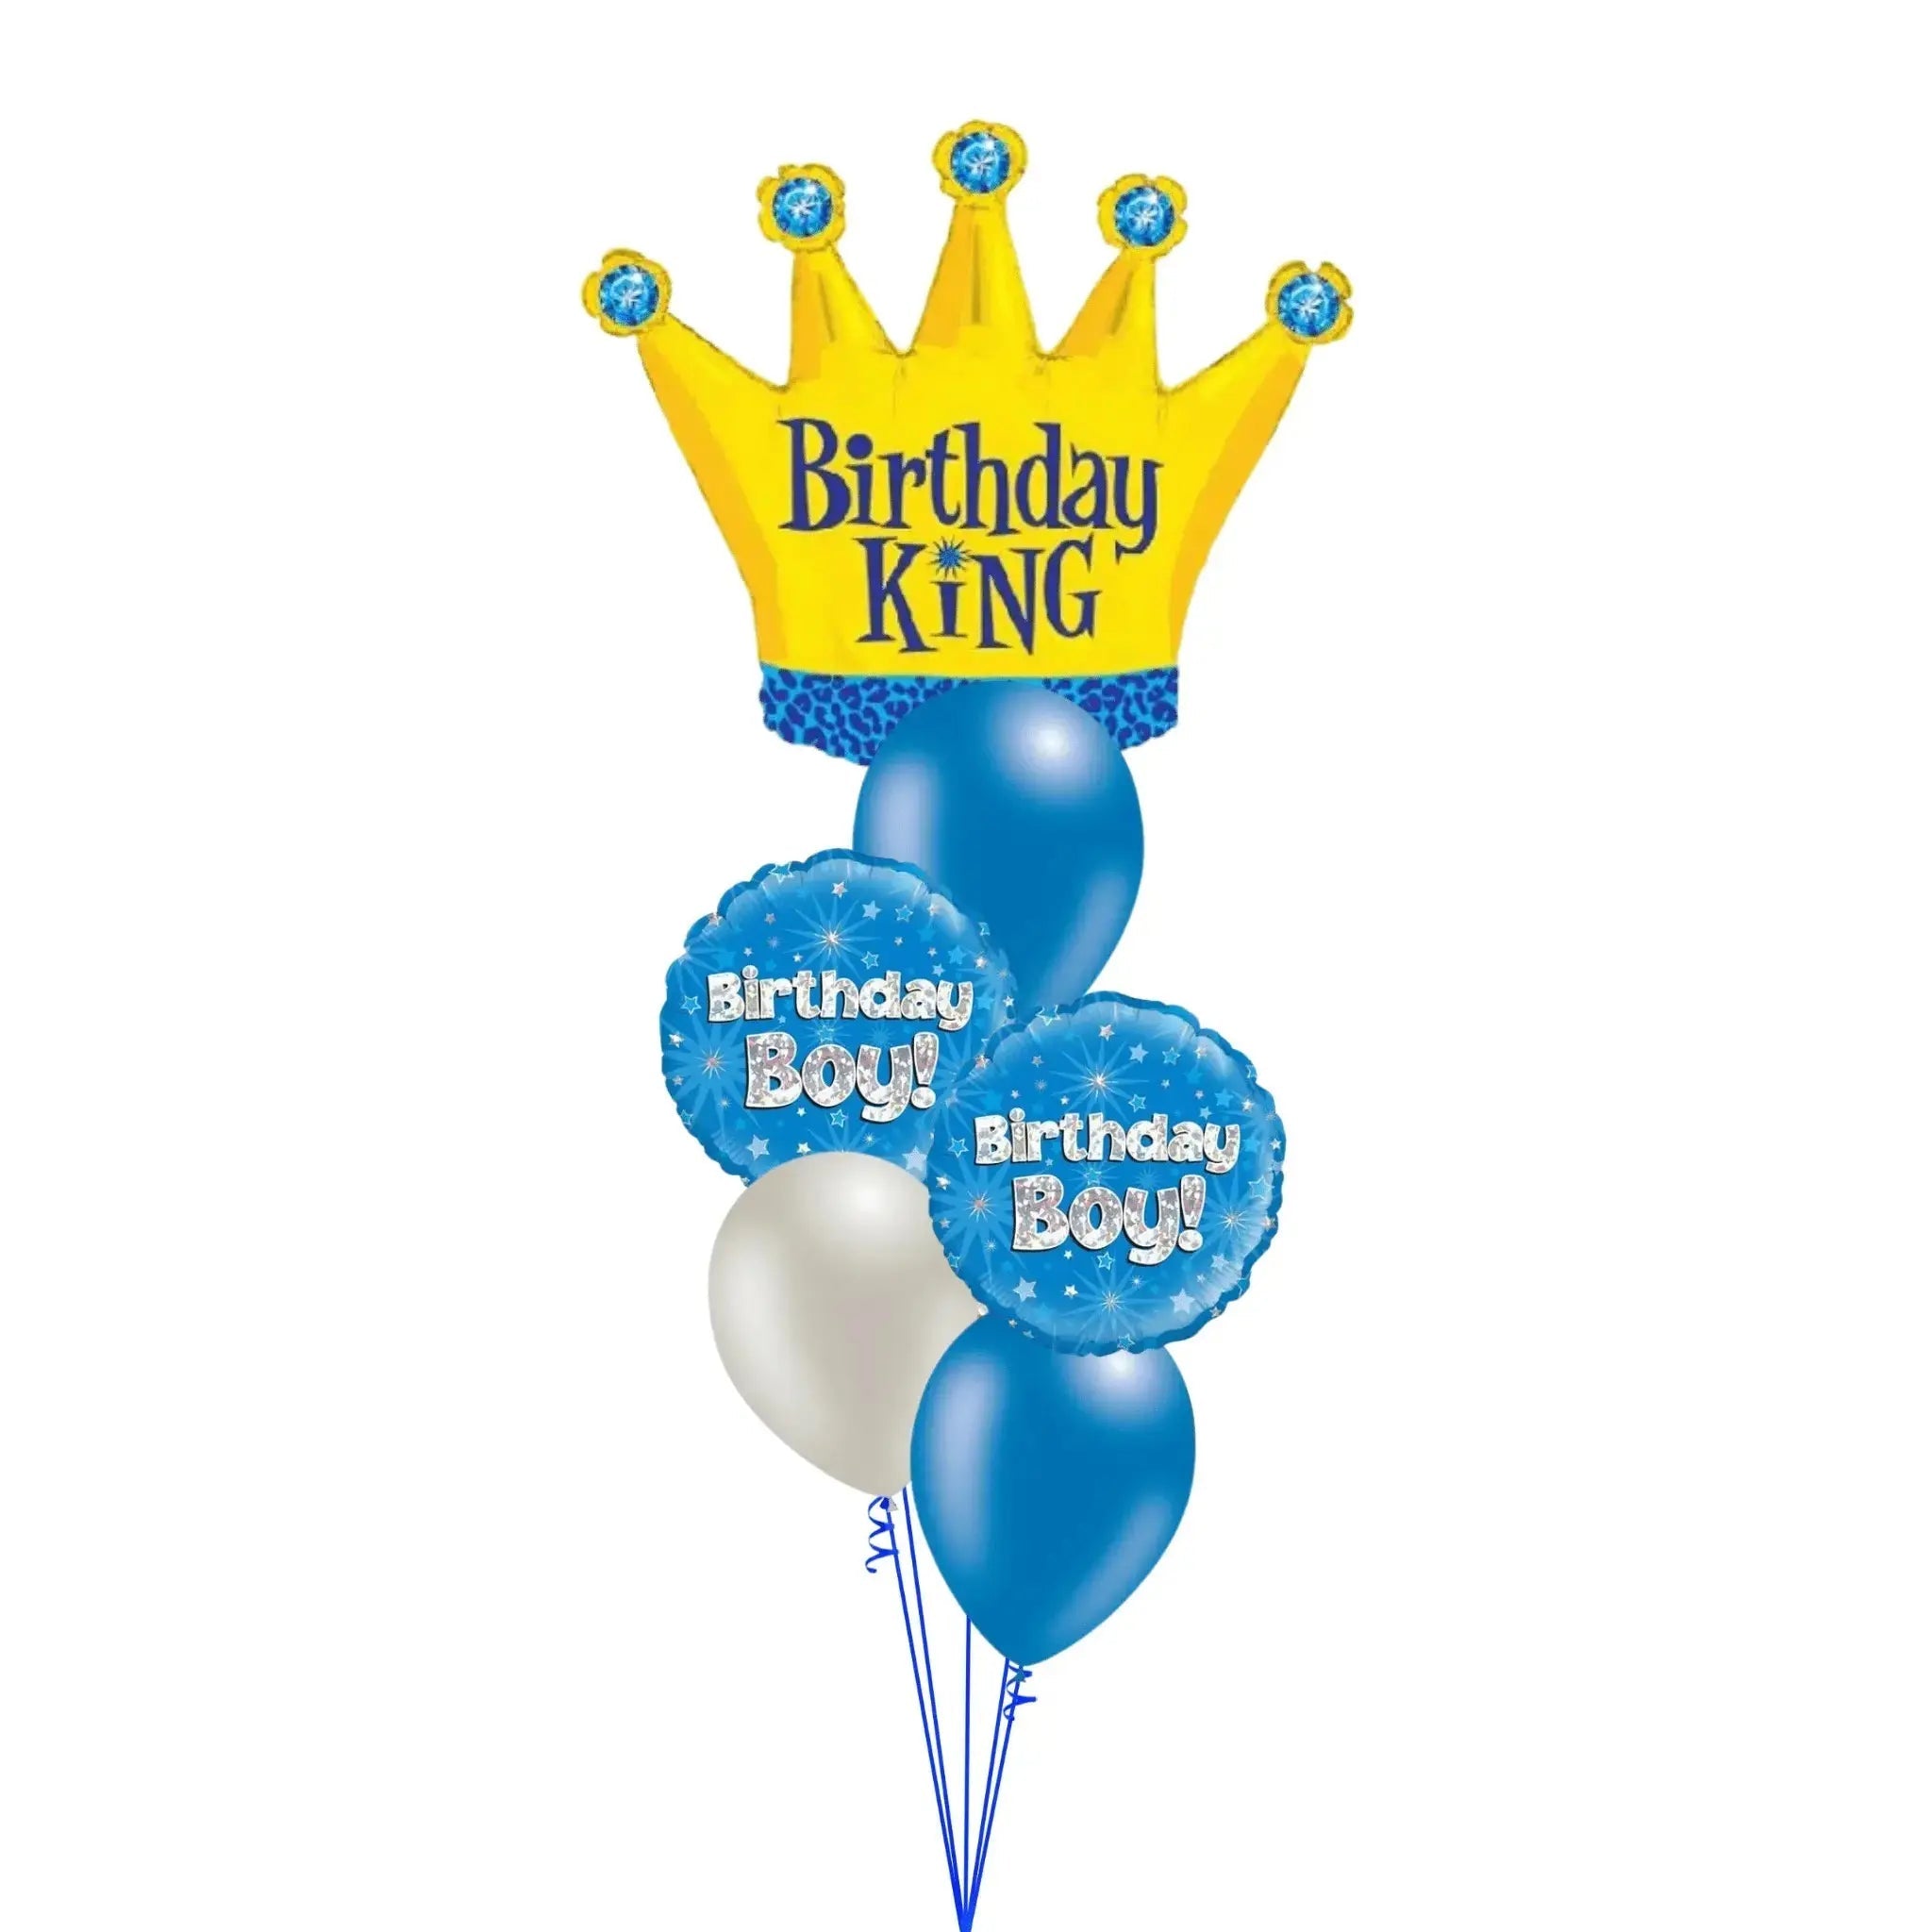 Birthday King Luxury Bouquet | The Party Hut